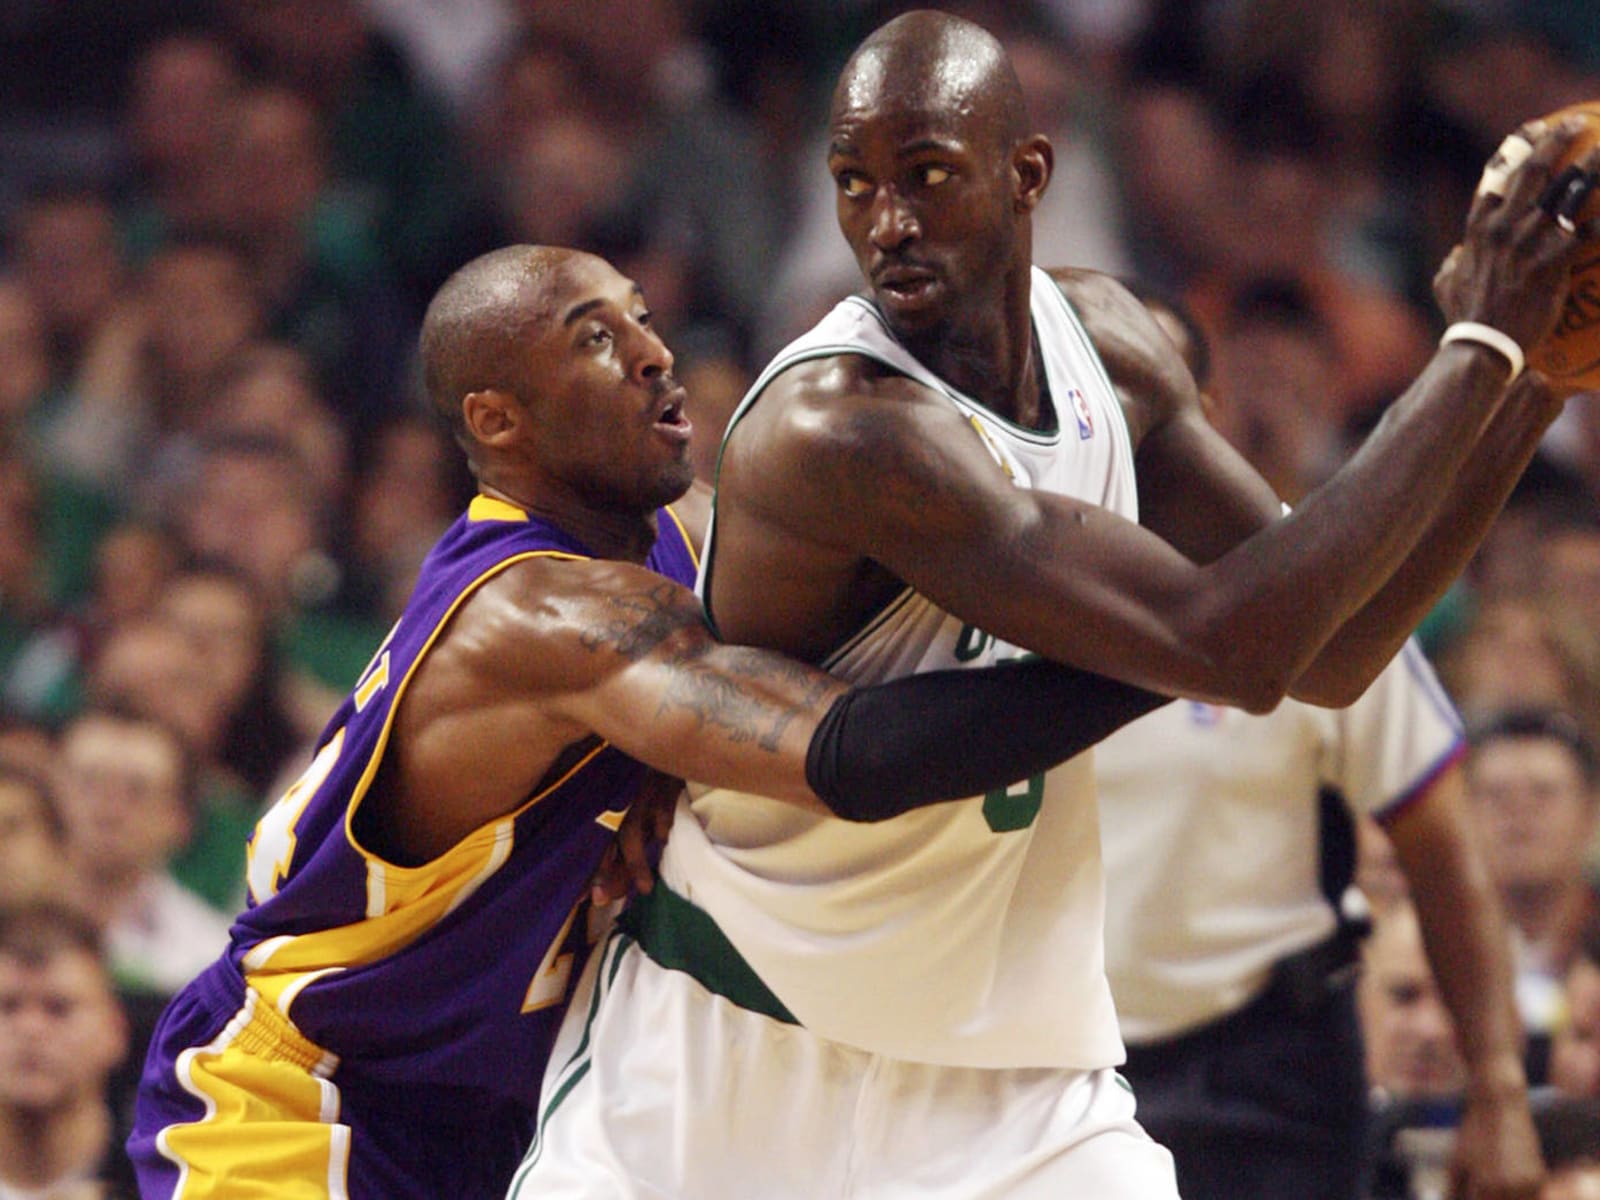 Kevin Garnett, Kobe Bryant reported to be certain of Hall of Fame